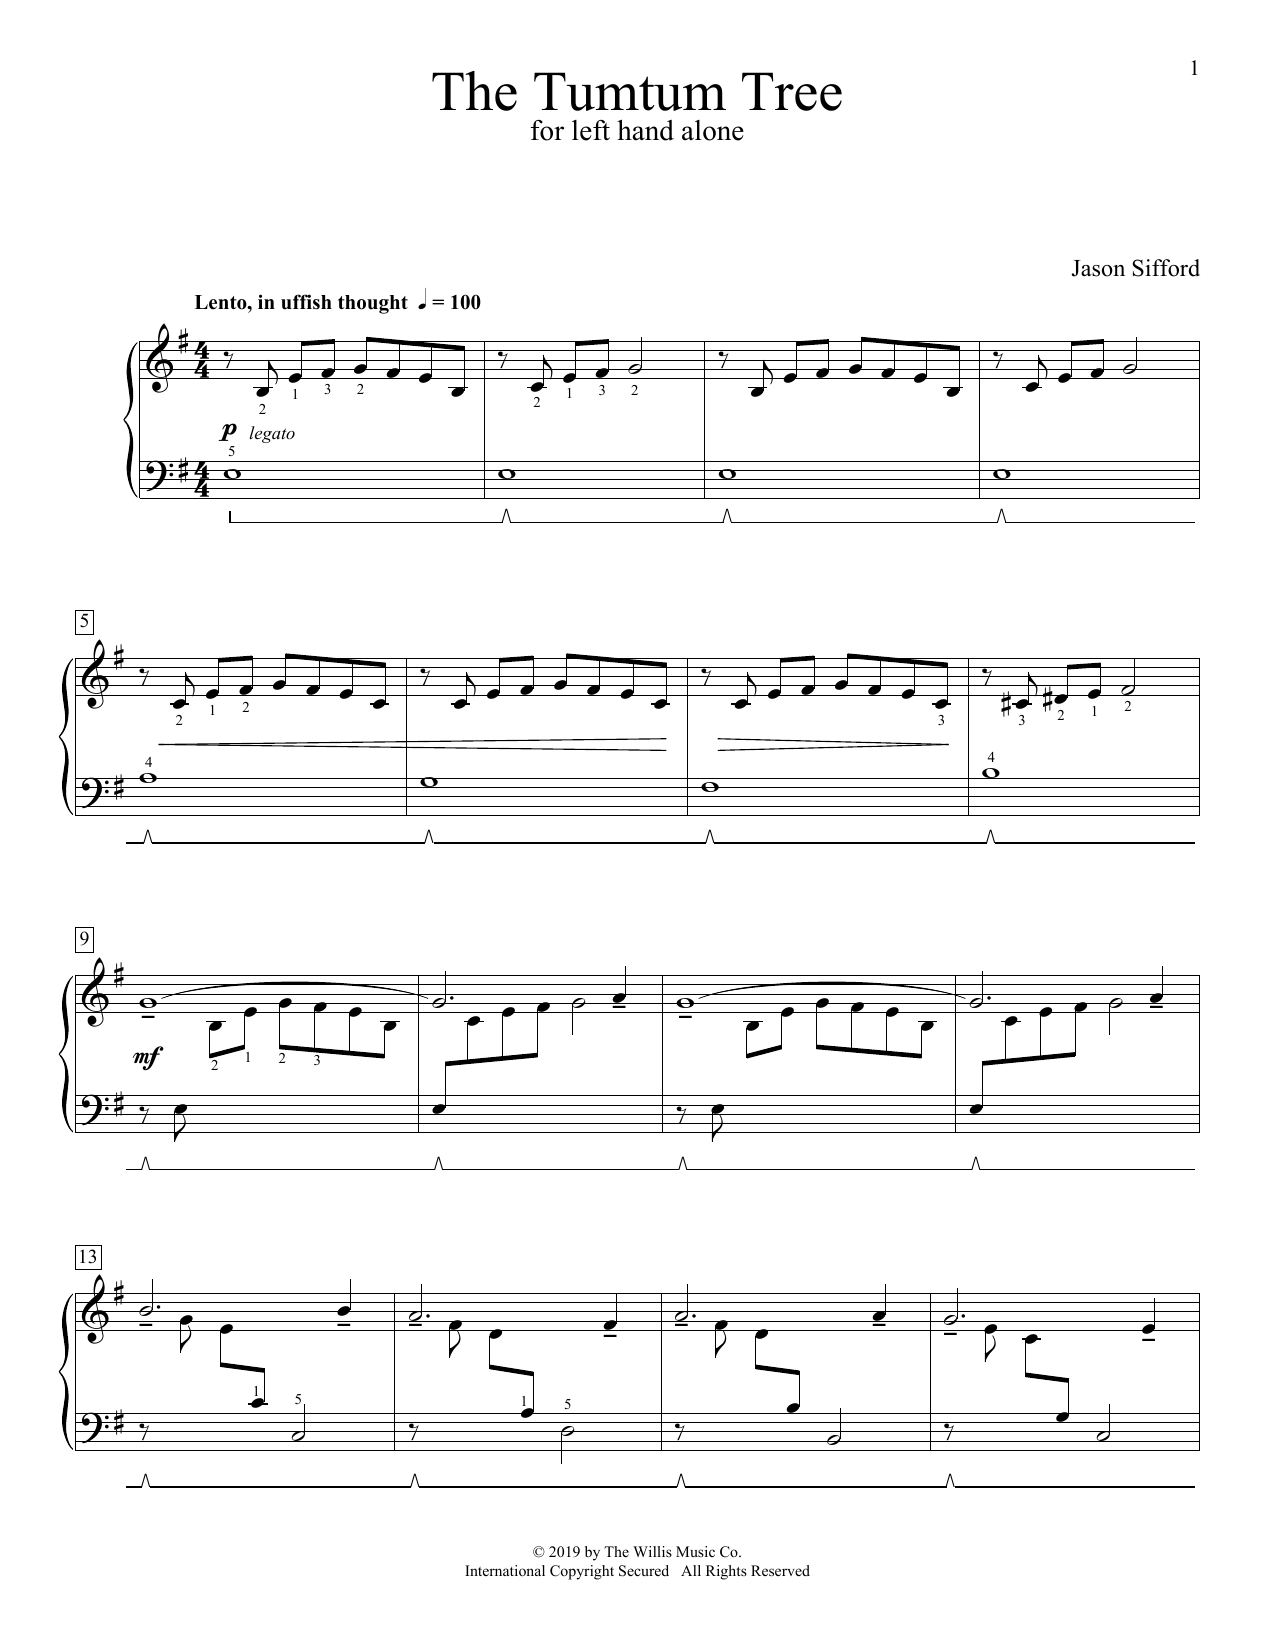 Jason Sifford The Tumtum Tree sheet music preview music notes and score for Educational Piano including 2 page(s)